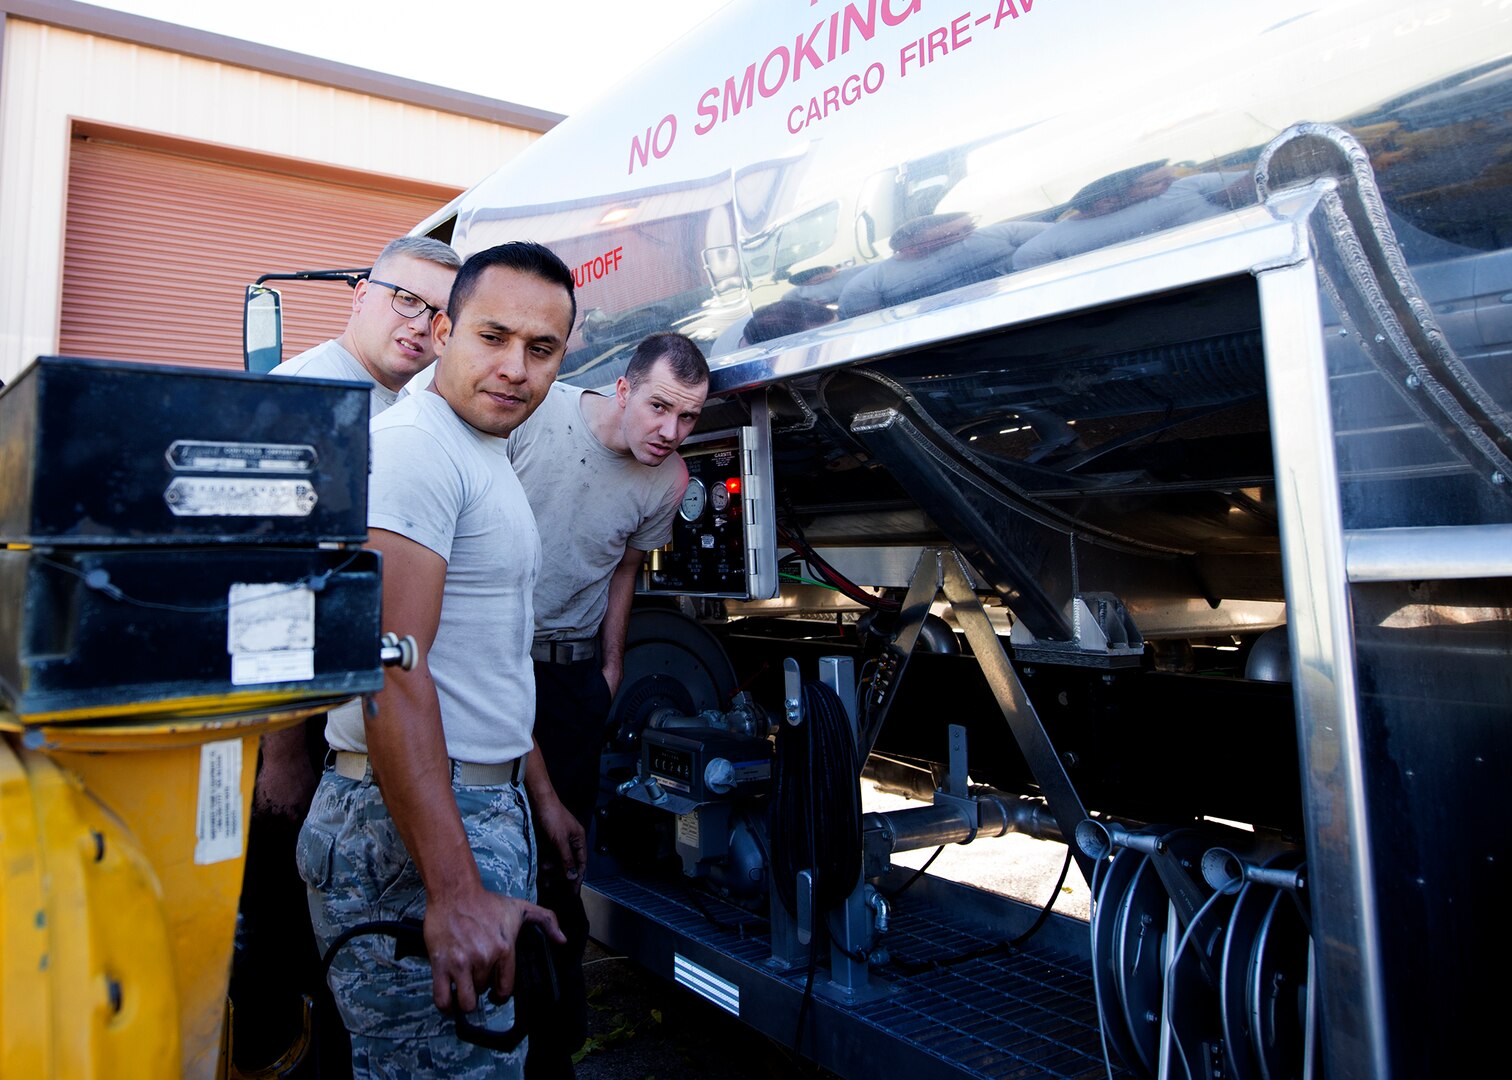 Airmen from the 49th Logistics Readiness Squadron refueling maintenance shop run a metering test on a fuel truck to determine the accuracy of its pump meter at Holloman Air Force Base, N.M., Dec. 4, 2017. The shop is responsible for maintenance and upkeep of approximately 18 refueling vehicles in support of Holloman’s mission. (U.S. Air Force photo by Staff Sgt. Timothy M. Young)